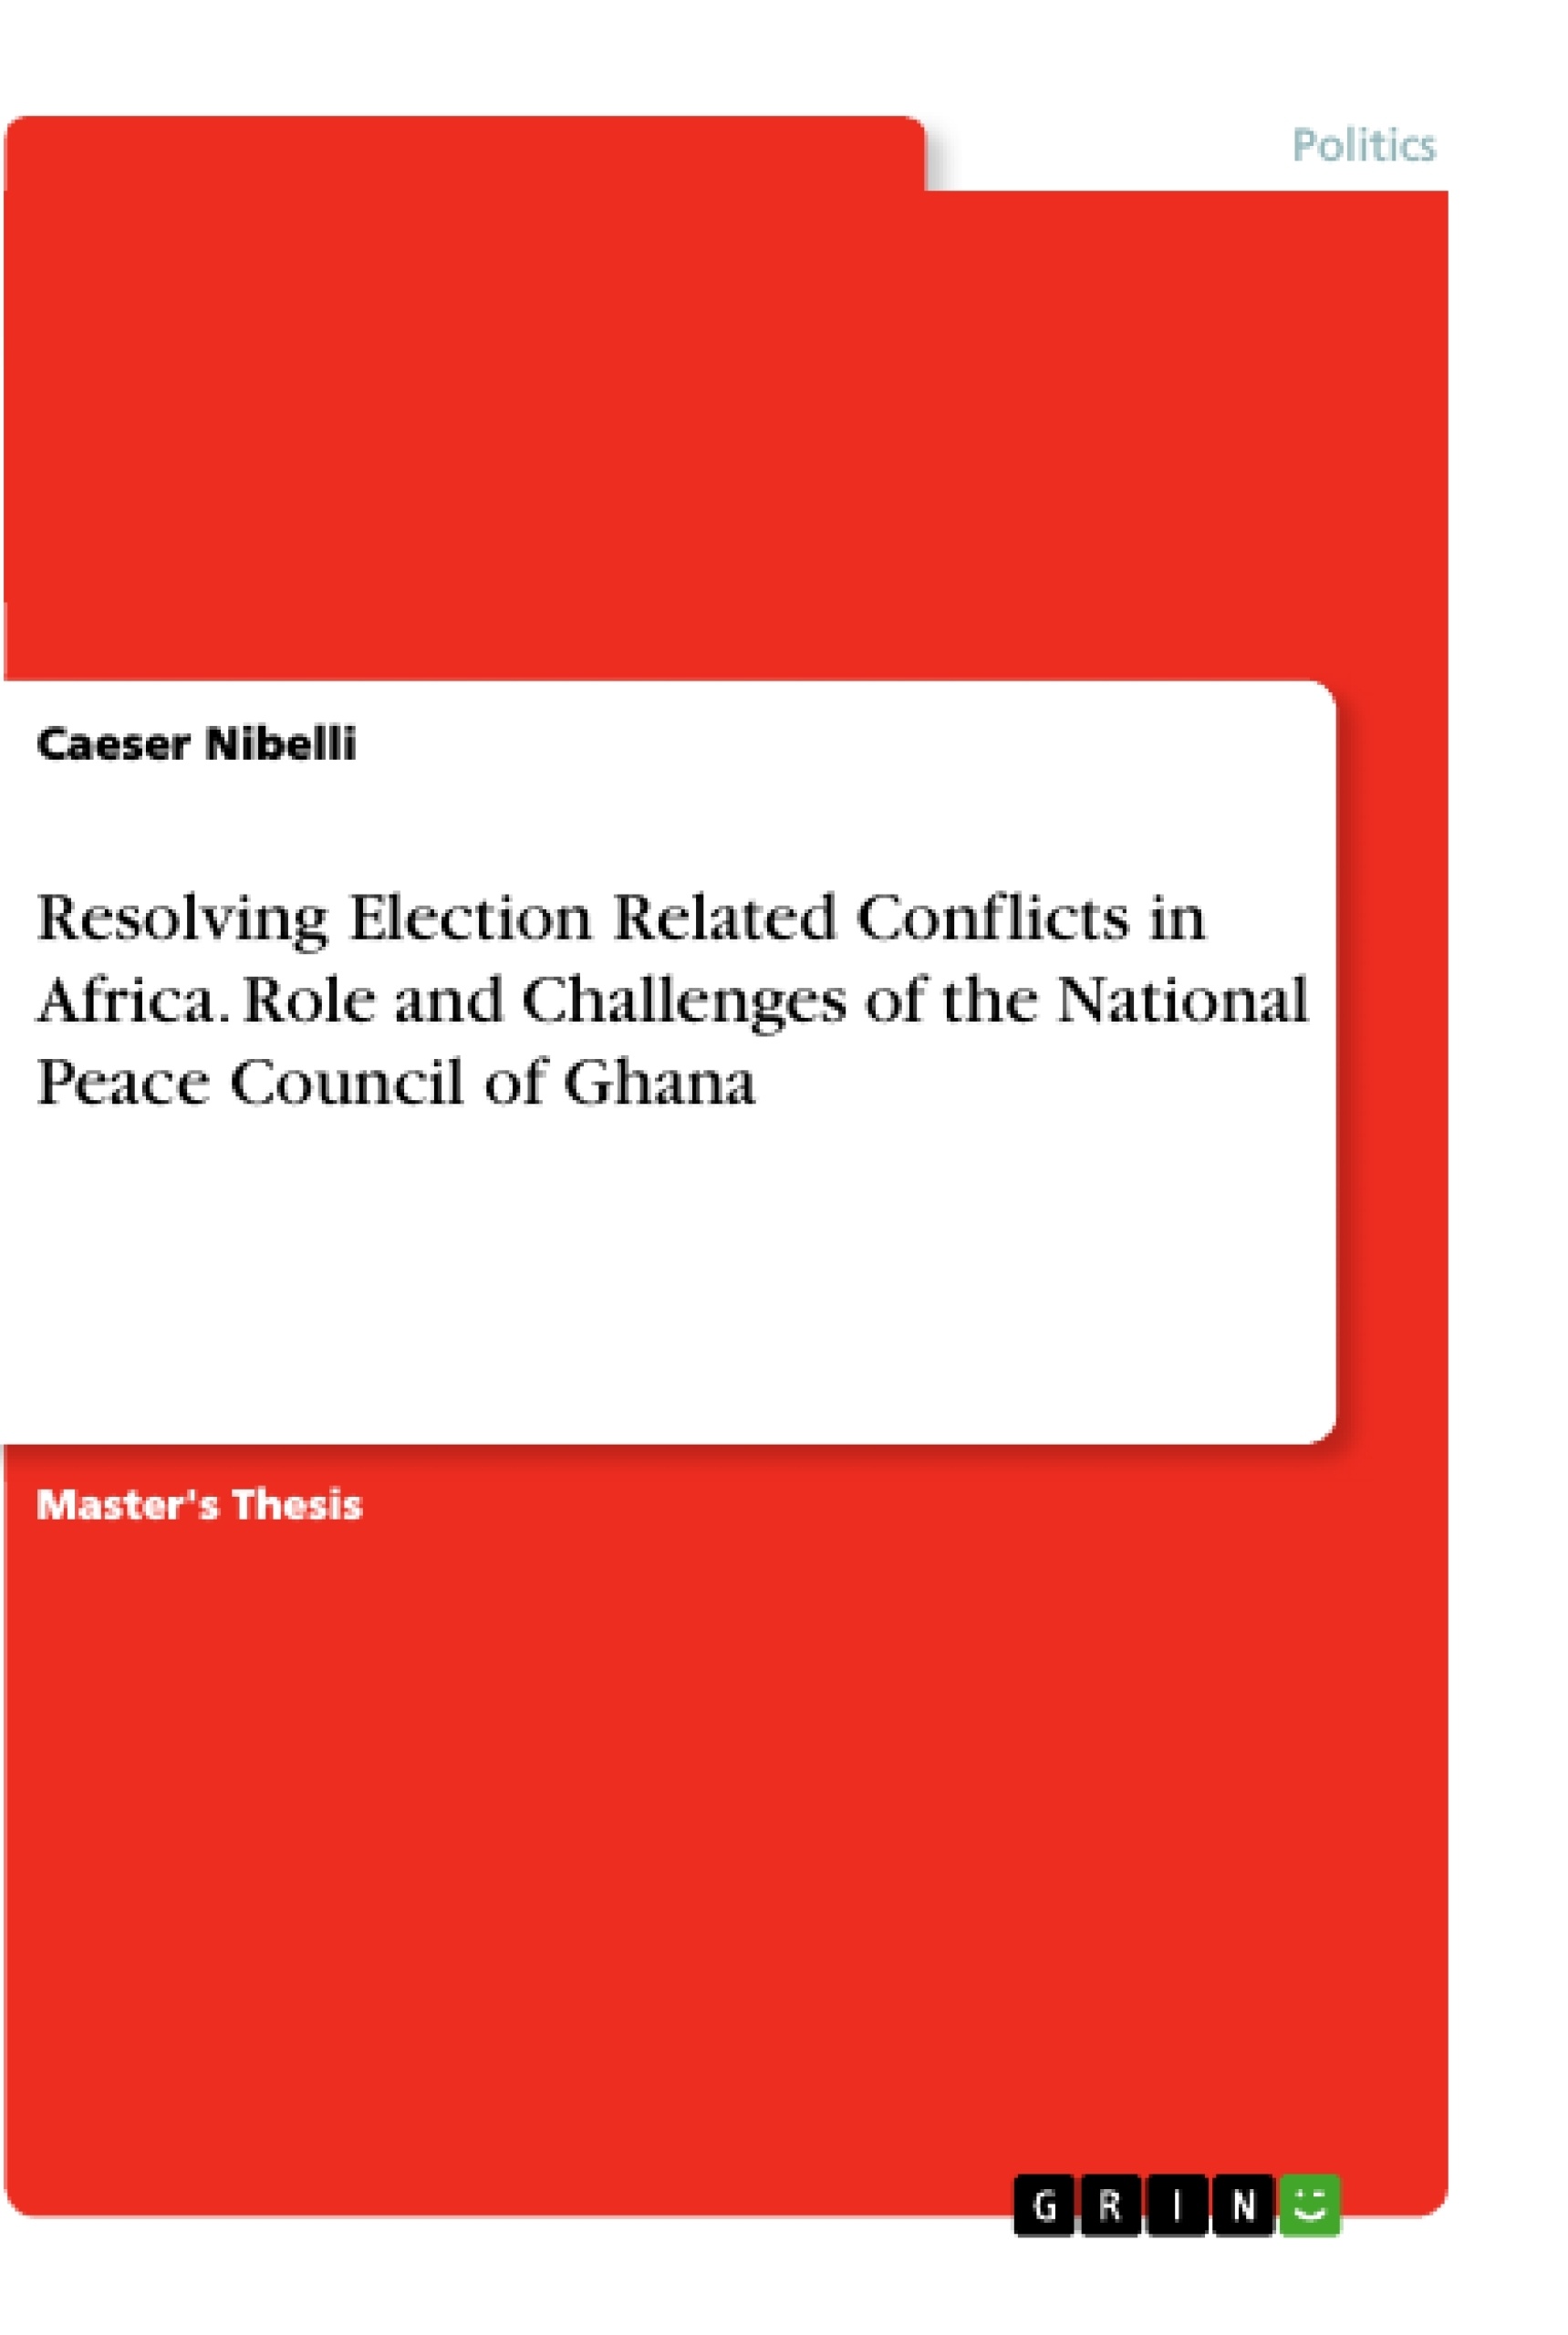 Title: Resolving Election Related Conflicts in Africa. Role and Challenges of the National Peace Council of Ghana